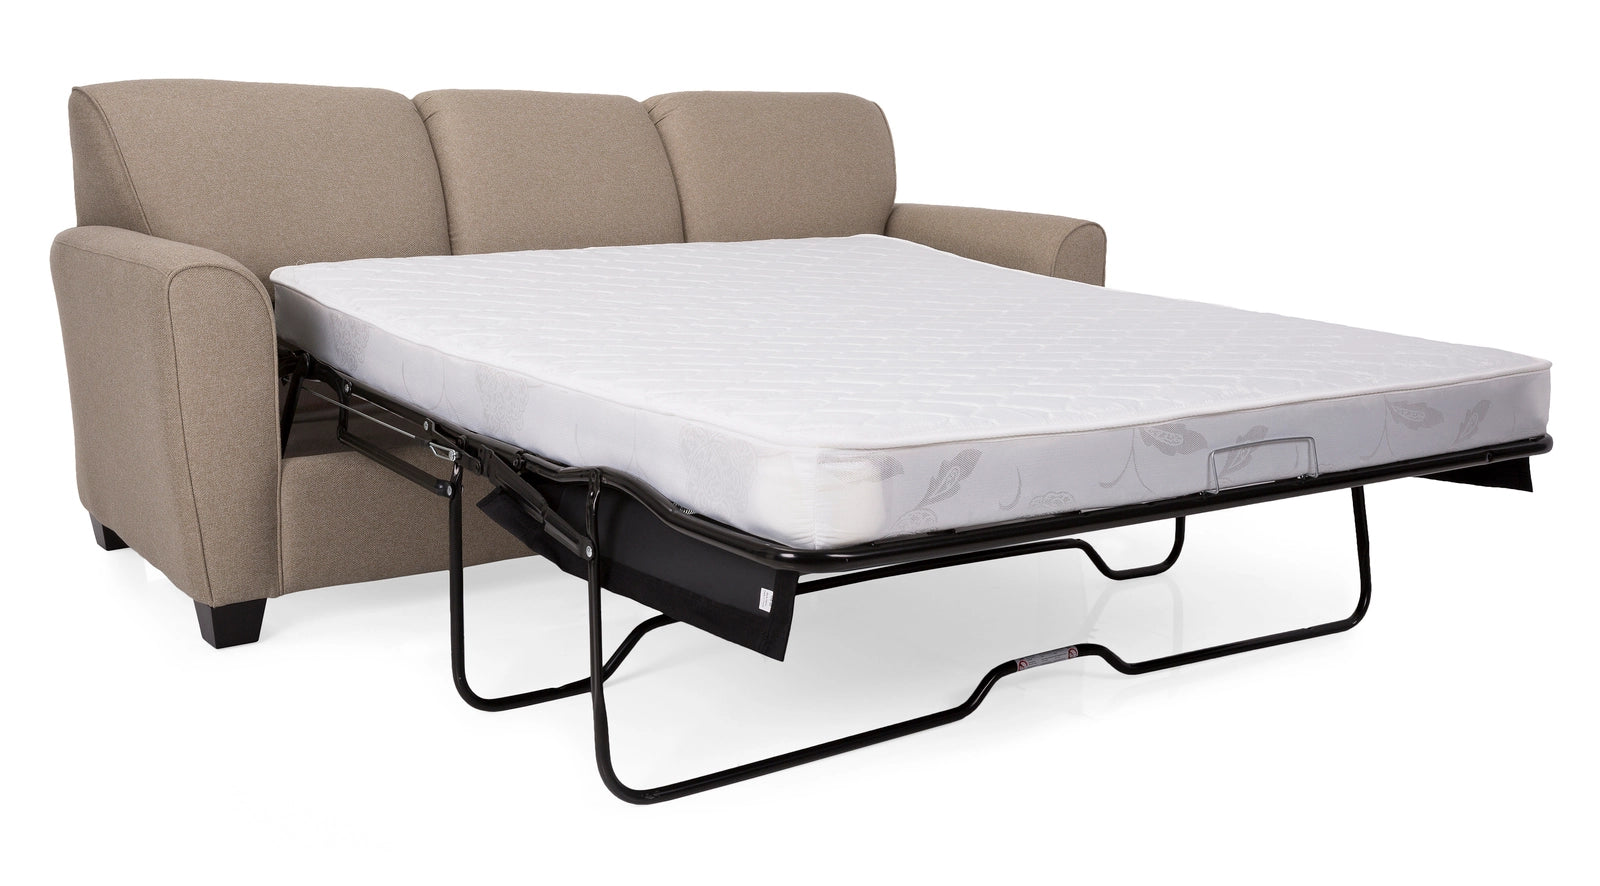 77" Double Sofa Bed